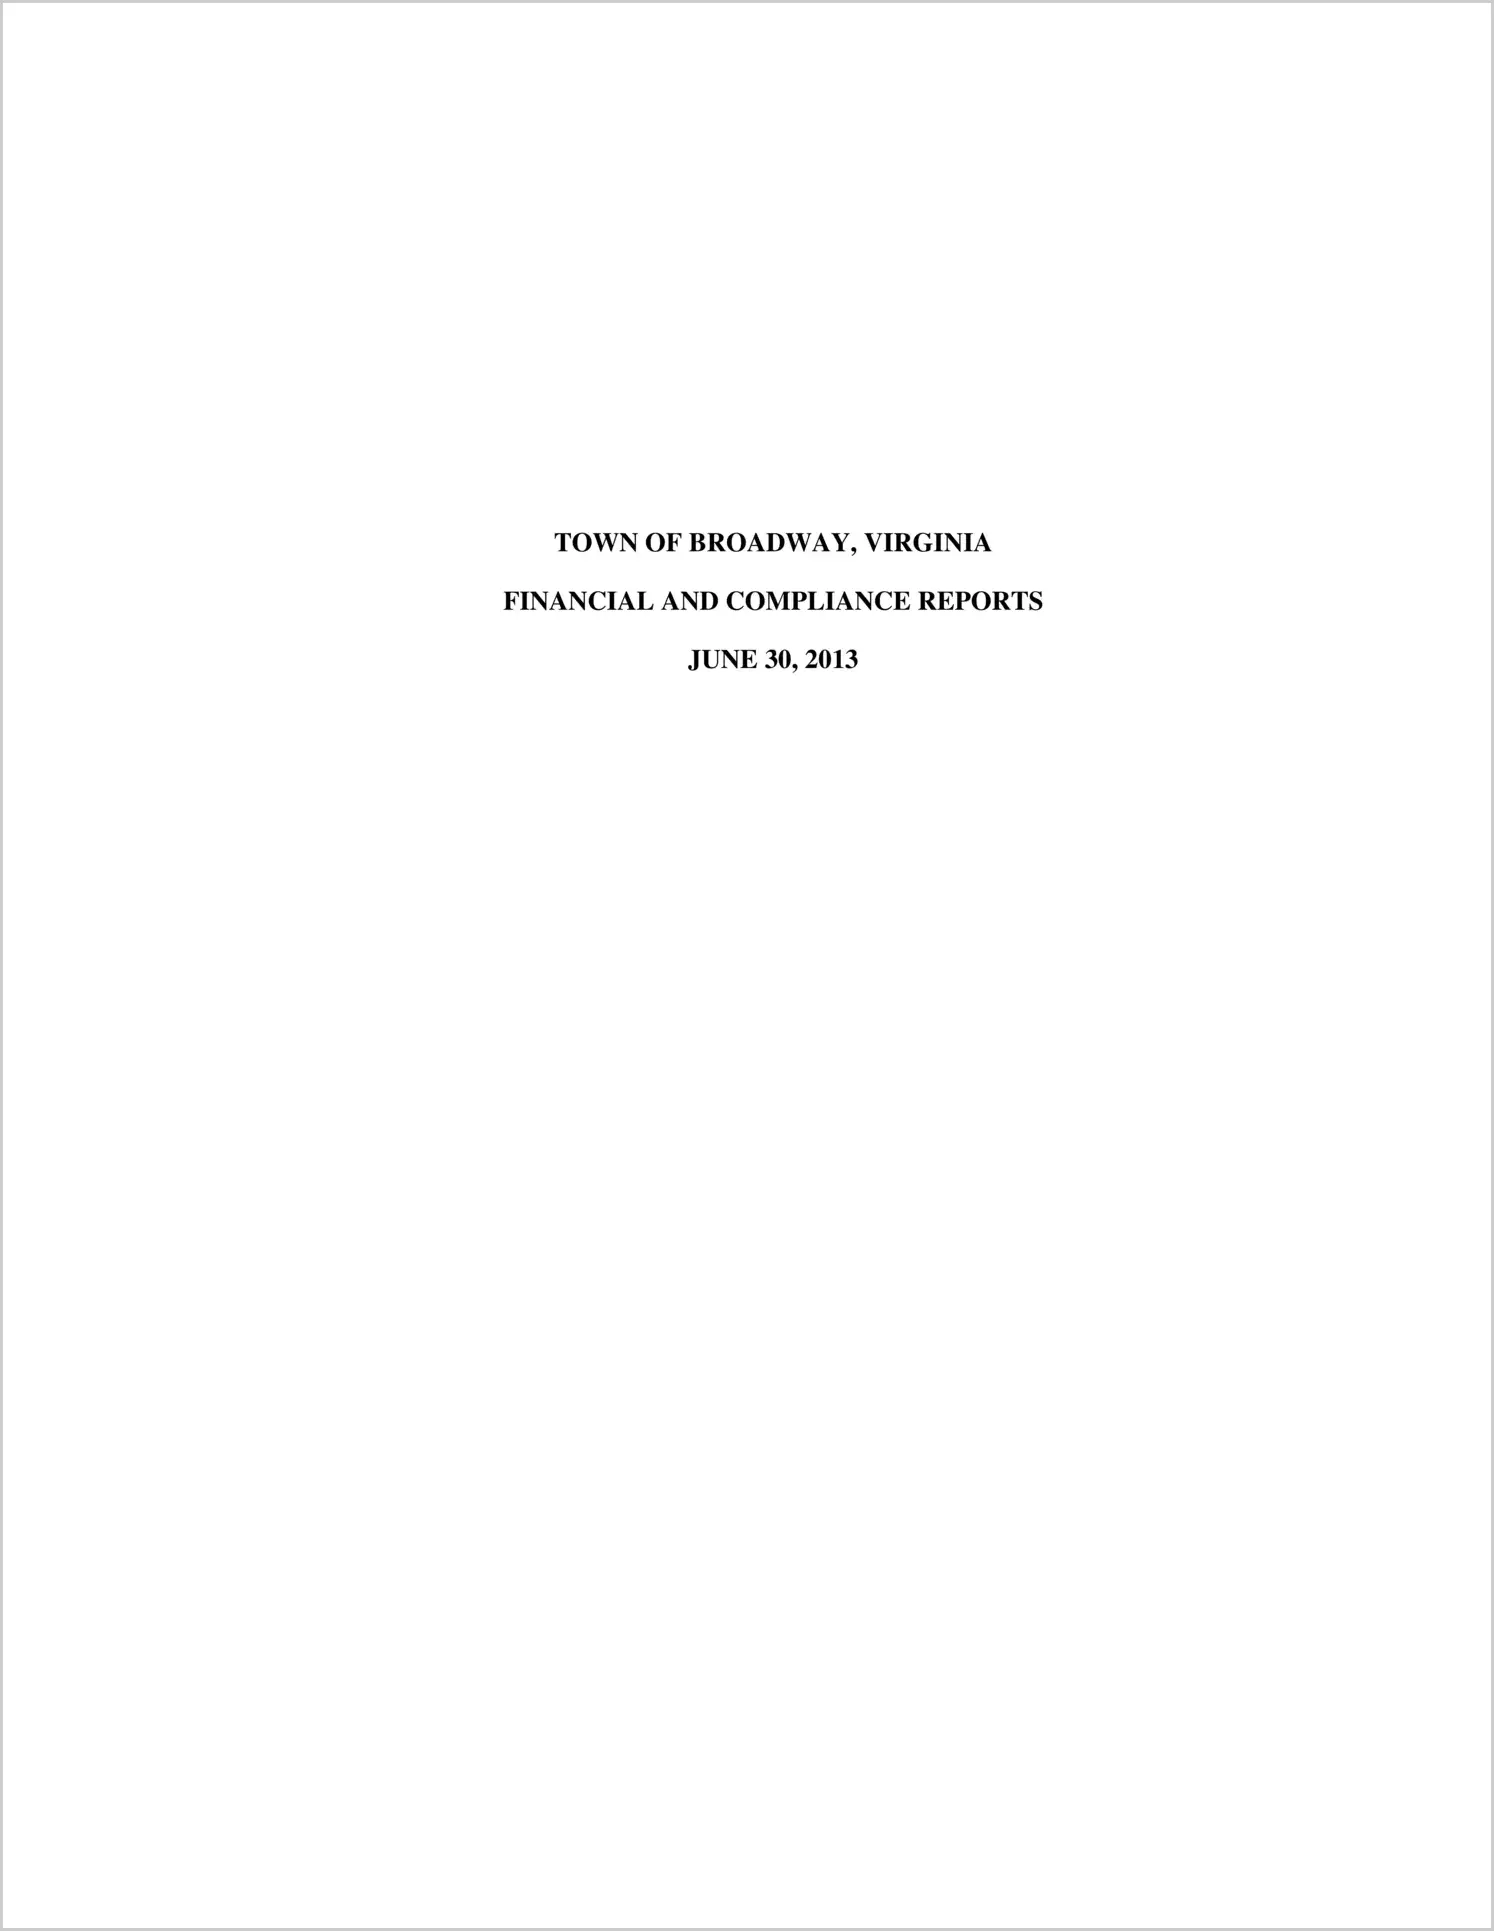 2013 Annual Financial Report for Town of Broadway